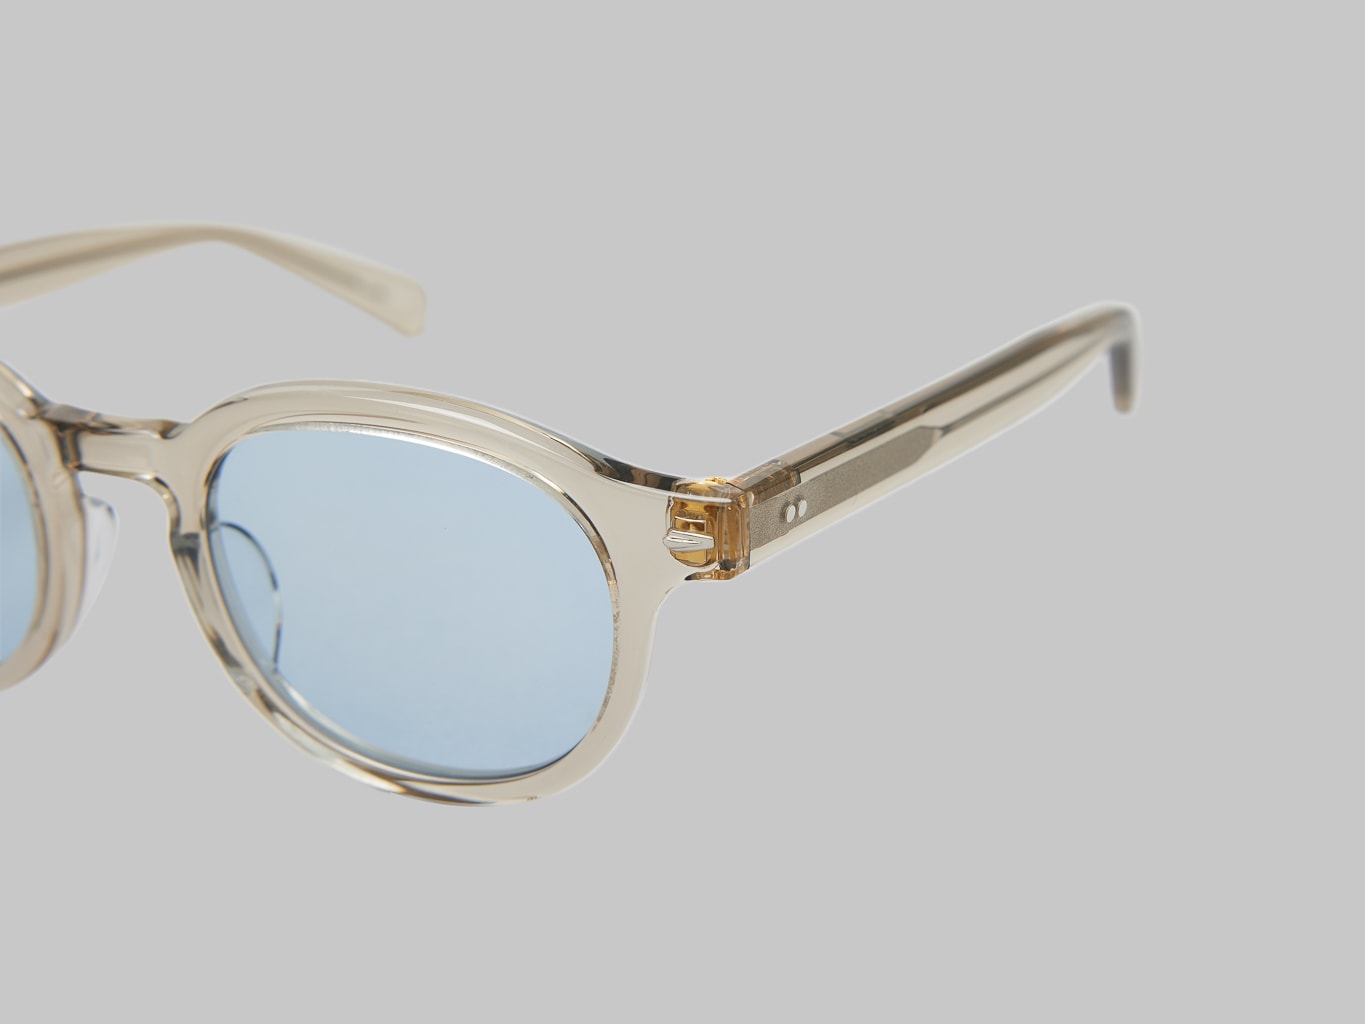 Calee Type Glasses Clear Blue  tint lenses